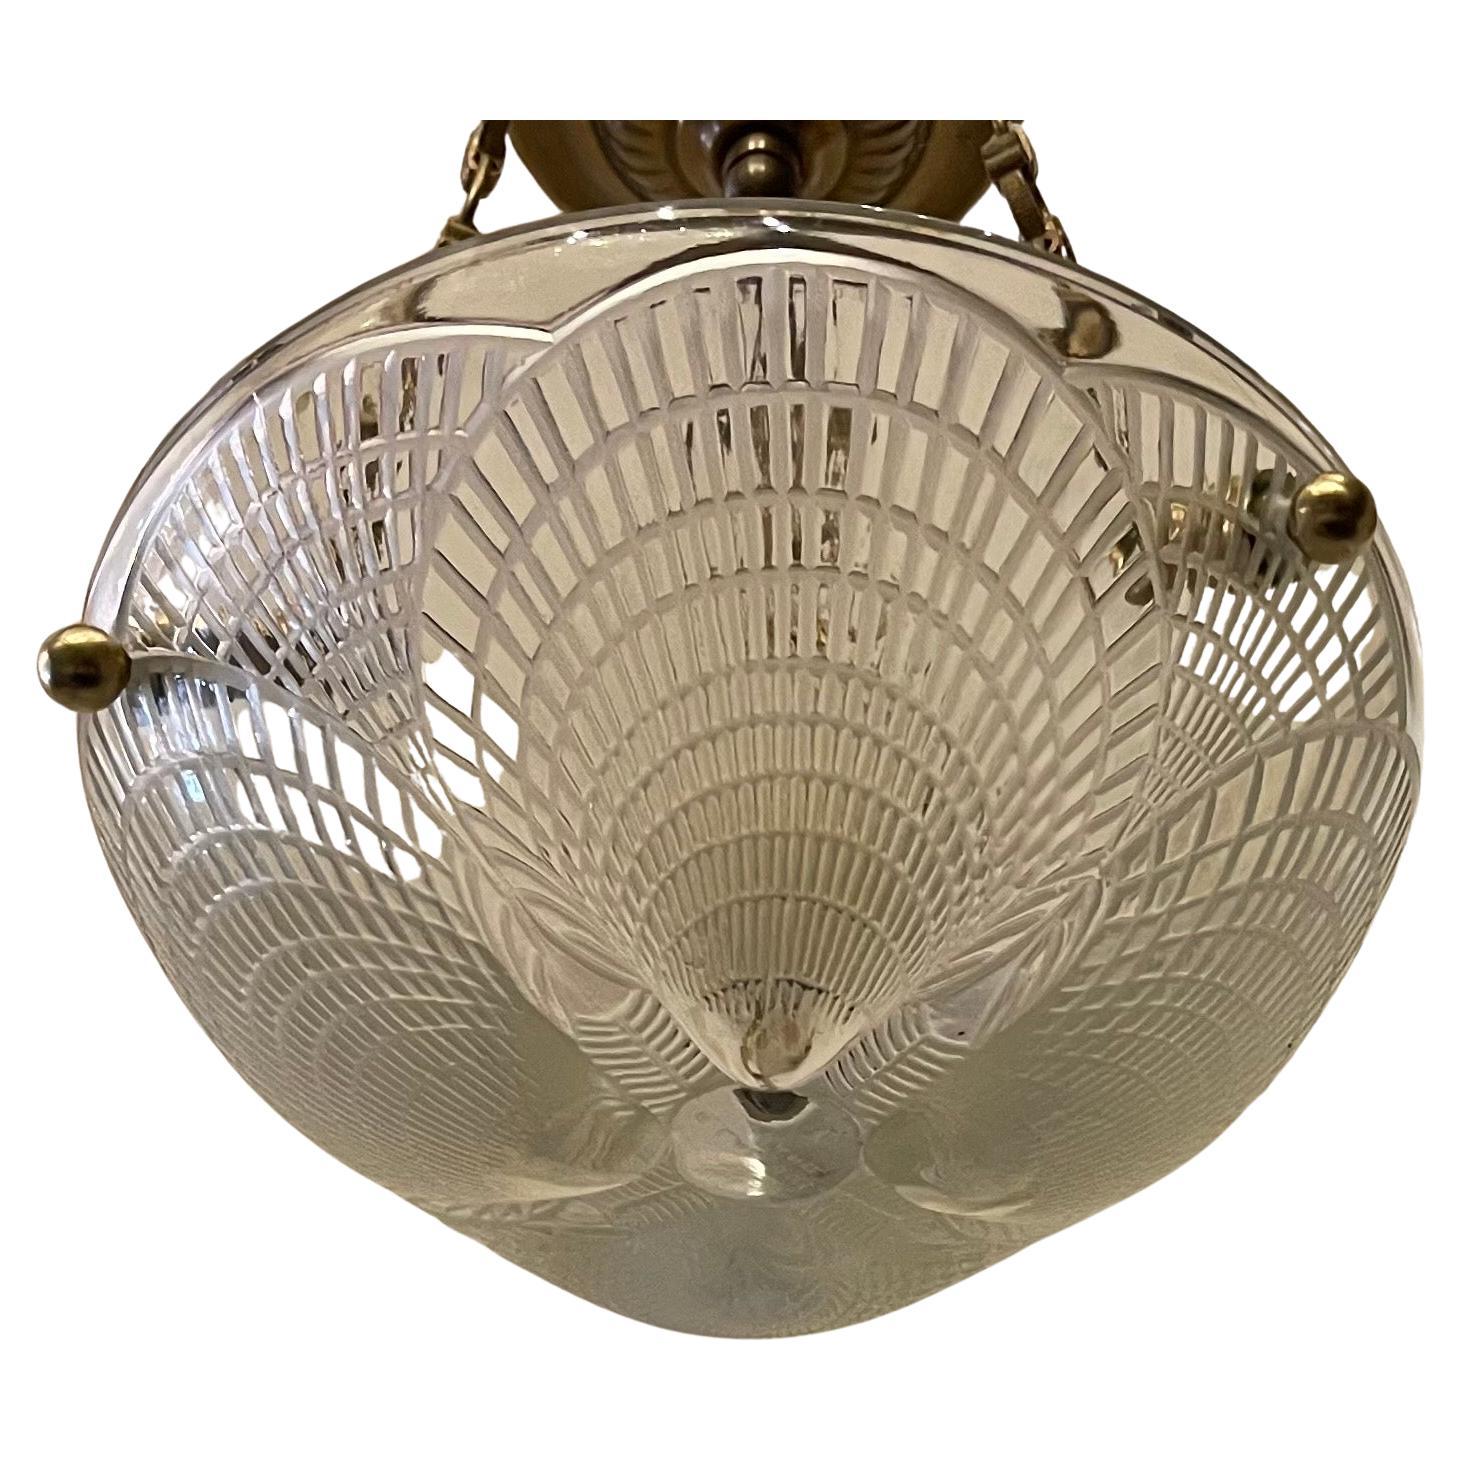 A Wonderful (René) R. Lalique Coquilles Art Deco Crystal Bowl Ceiling Fixture Chandelier With New Candelabra Socket.
Signed On The Center  